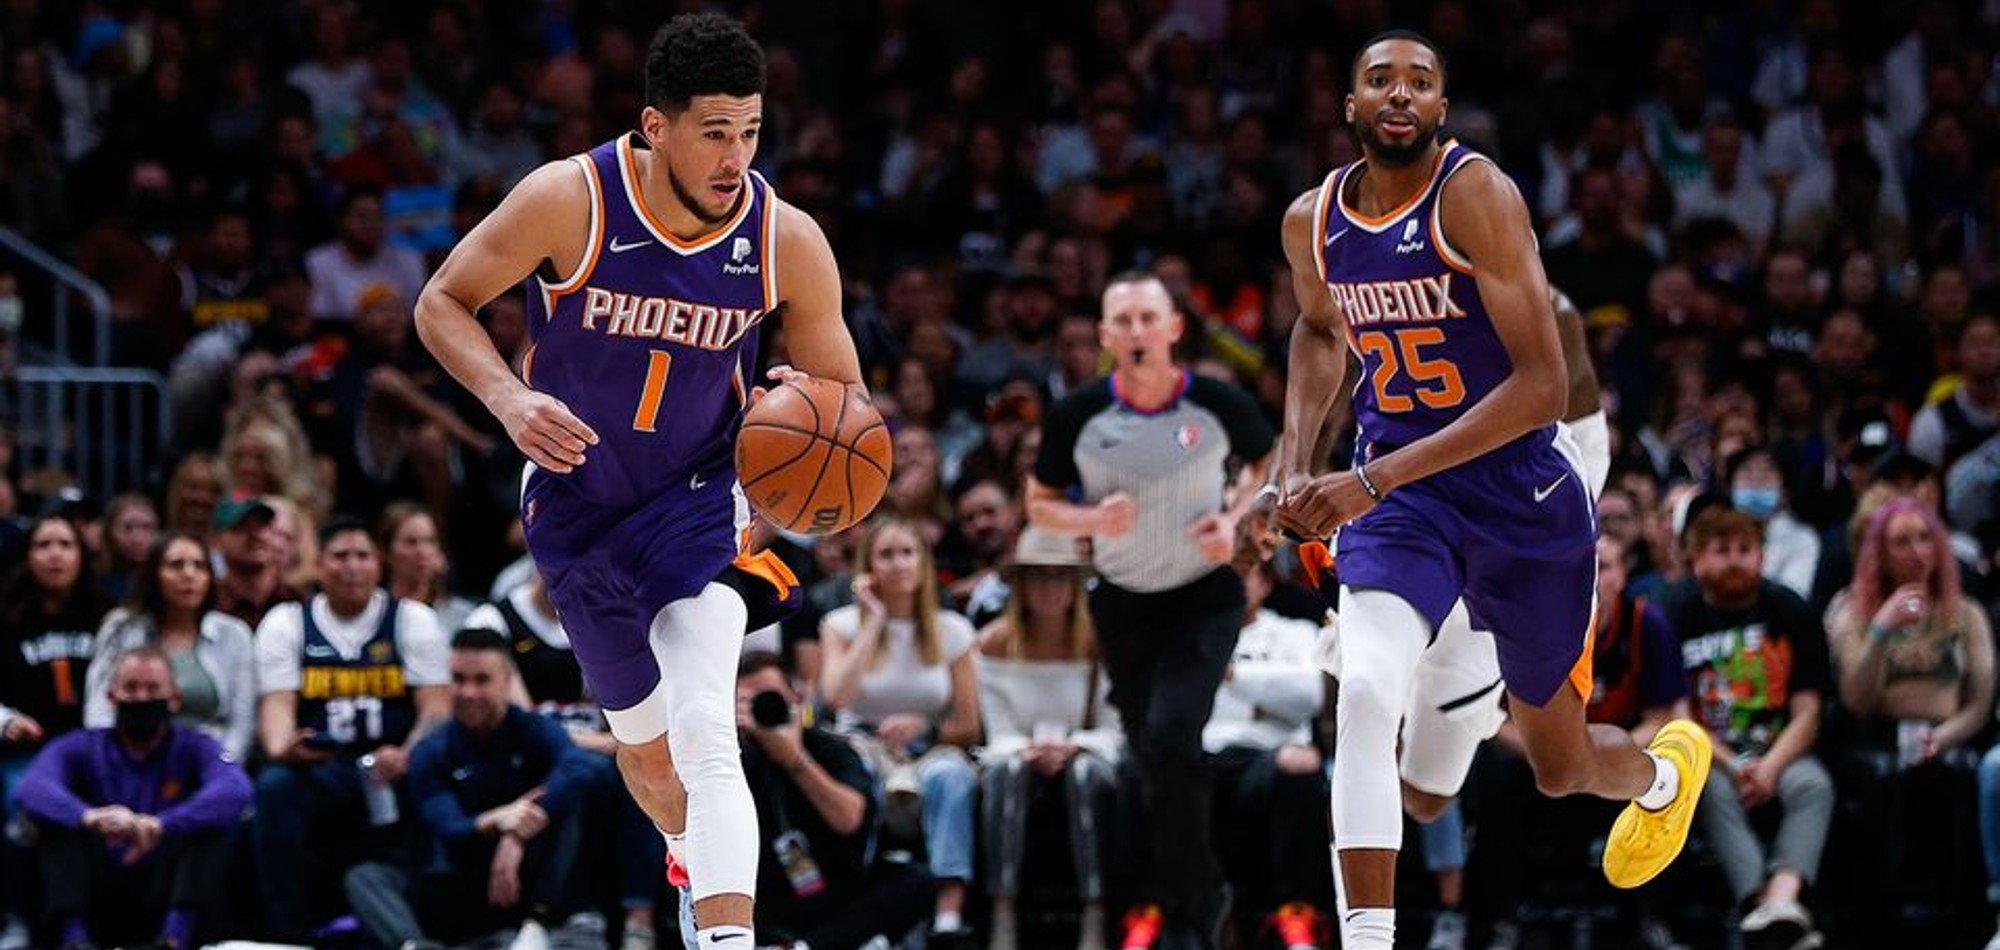 NBA roundup: Devin Booker scores 49, Suns clinch top seed in West